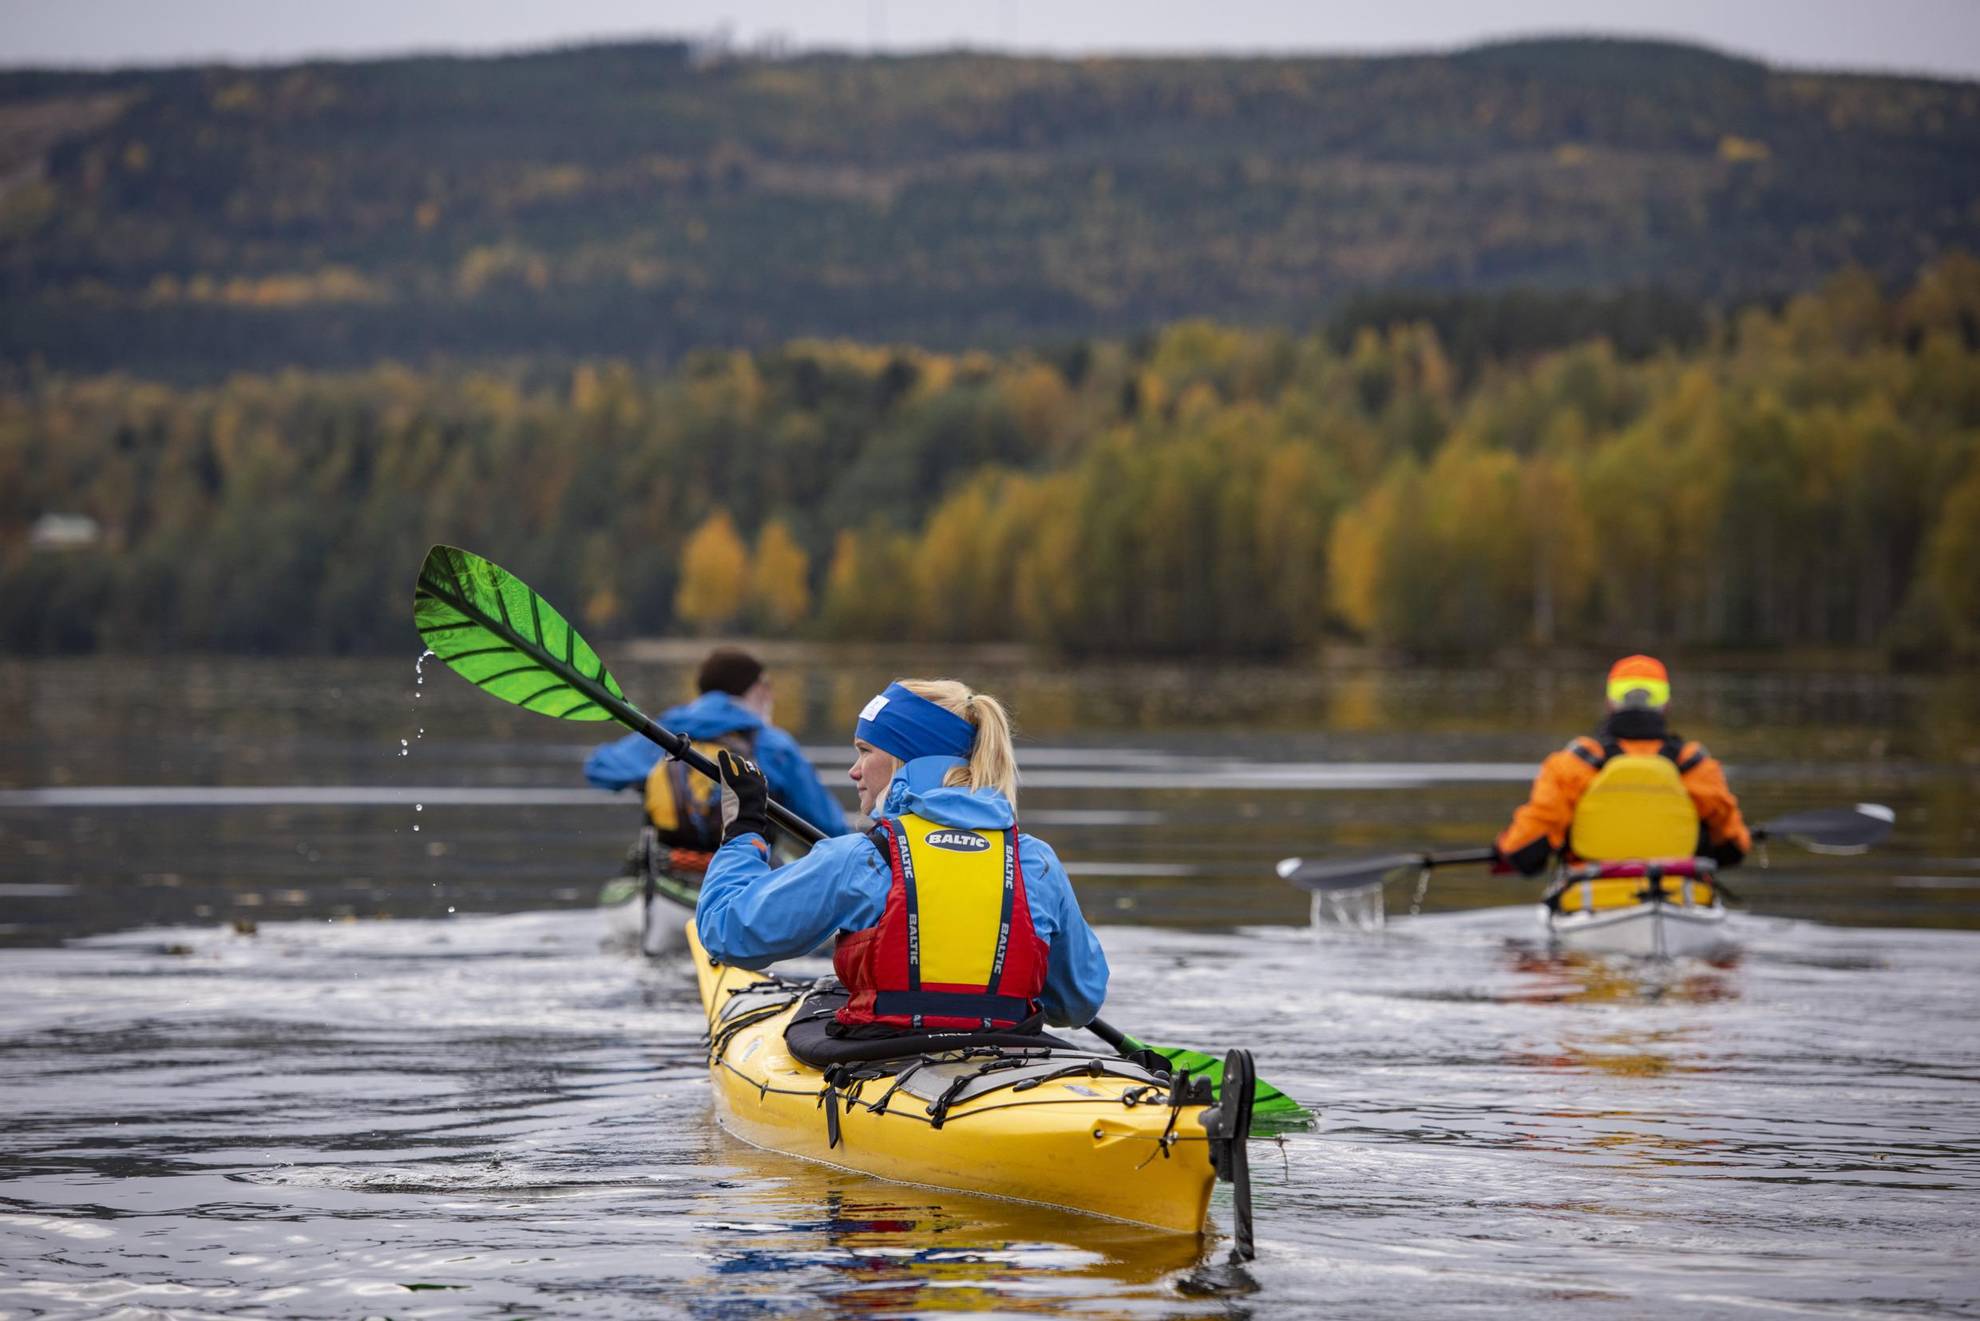 A women paddling a kayak in a group.